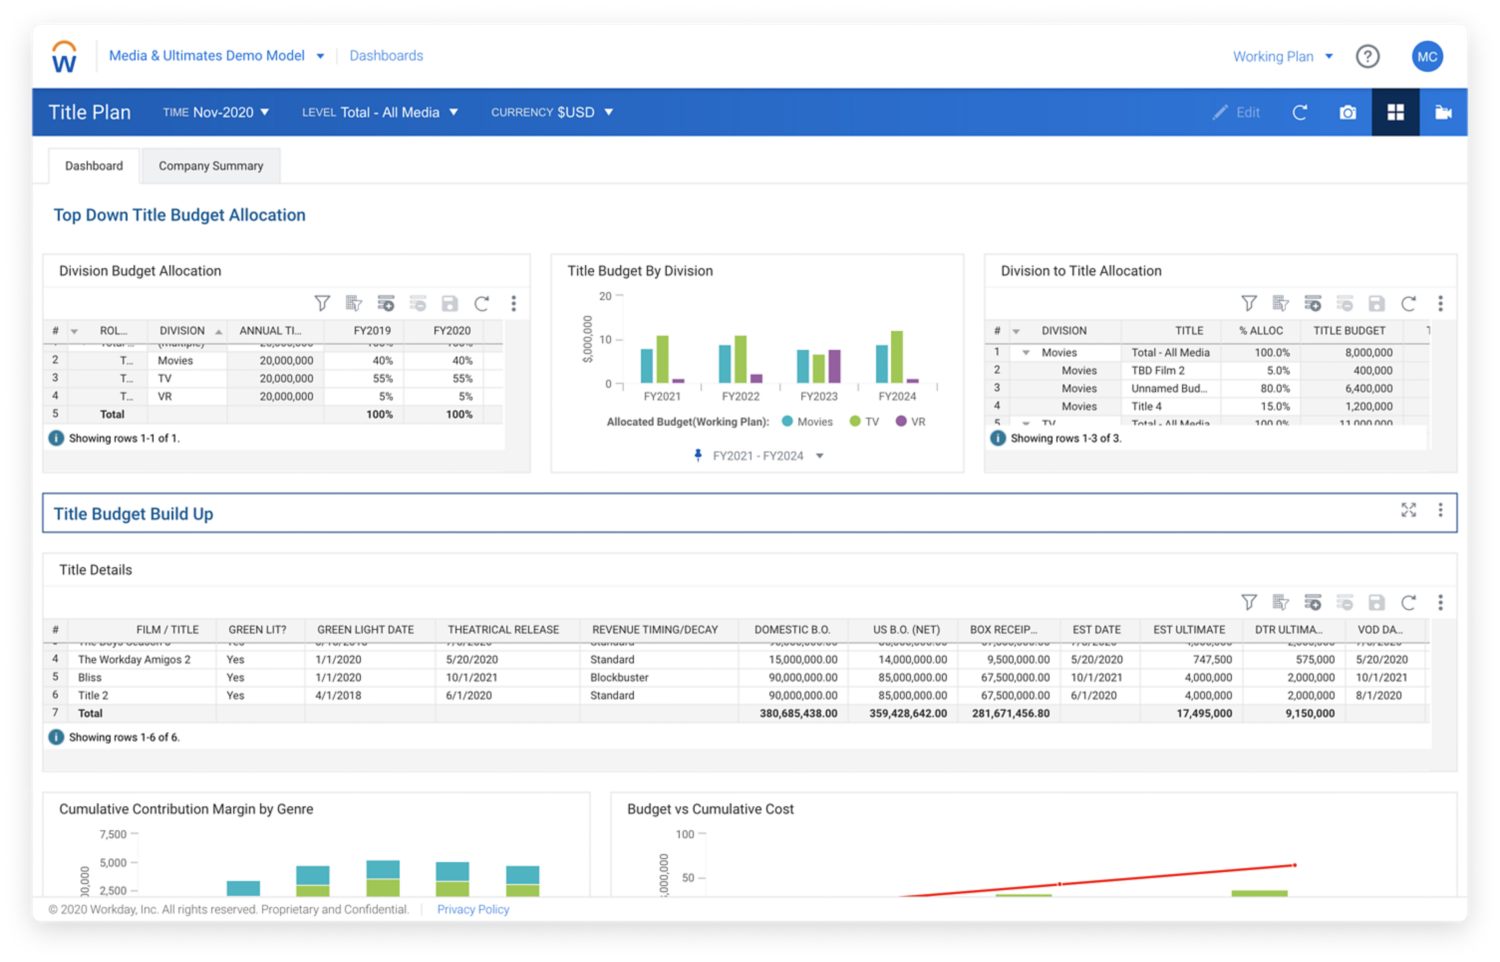 Workday Adaptive Planning KPI dashboard for media production company